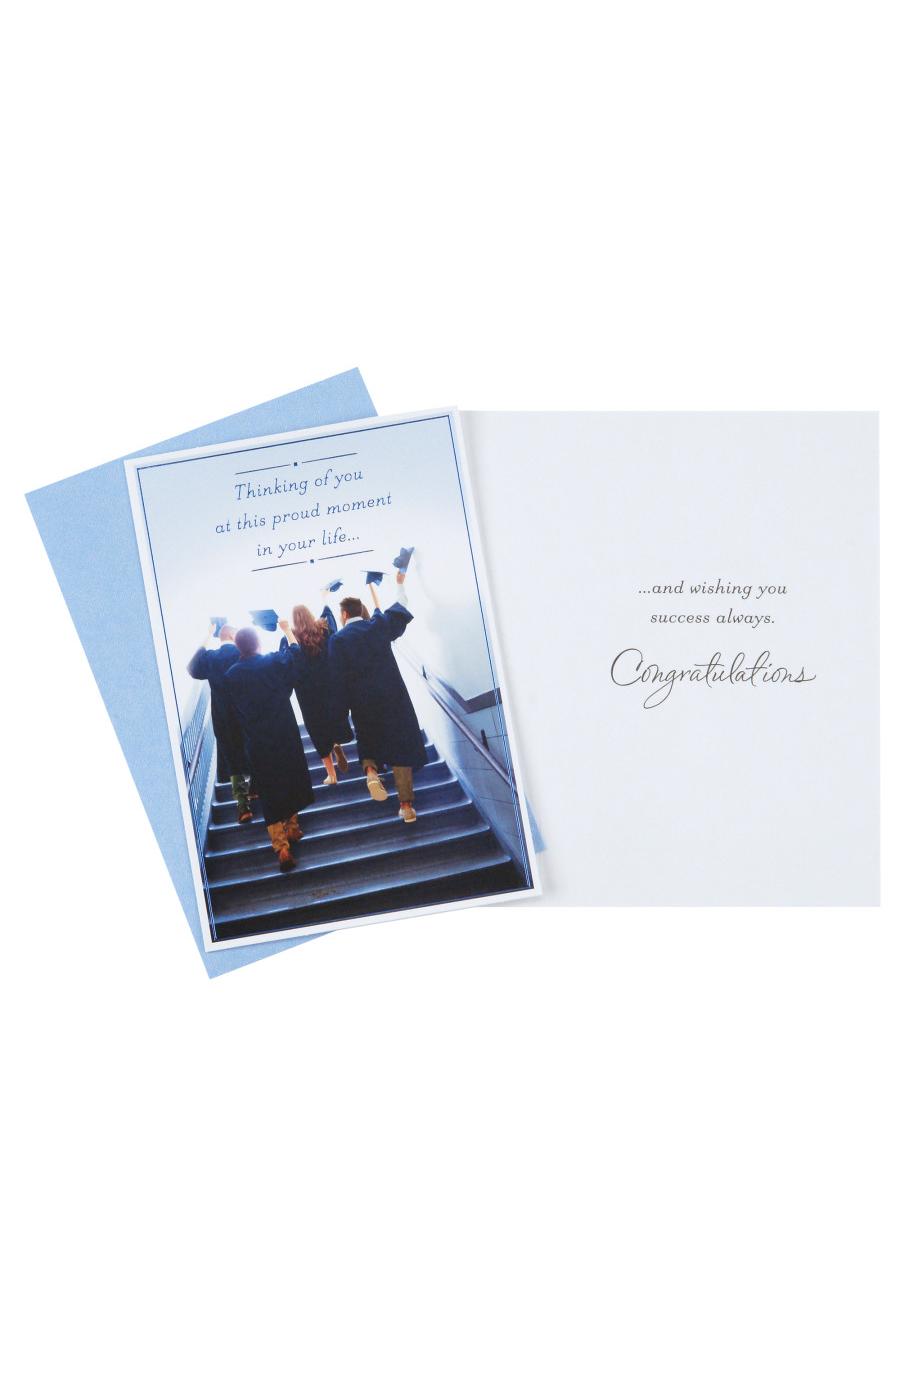 Hallmark Wishing You Success Assorted Graduation Cards with Envelopes - S8; image 2 of 2